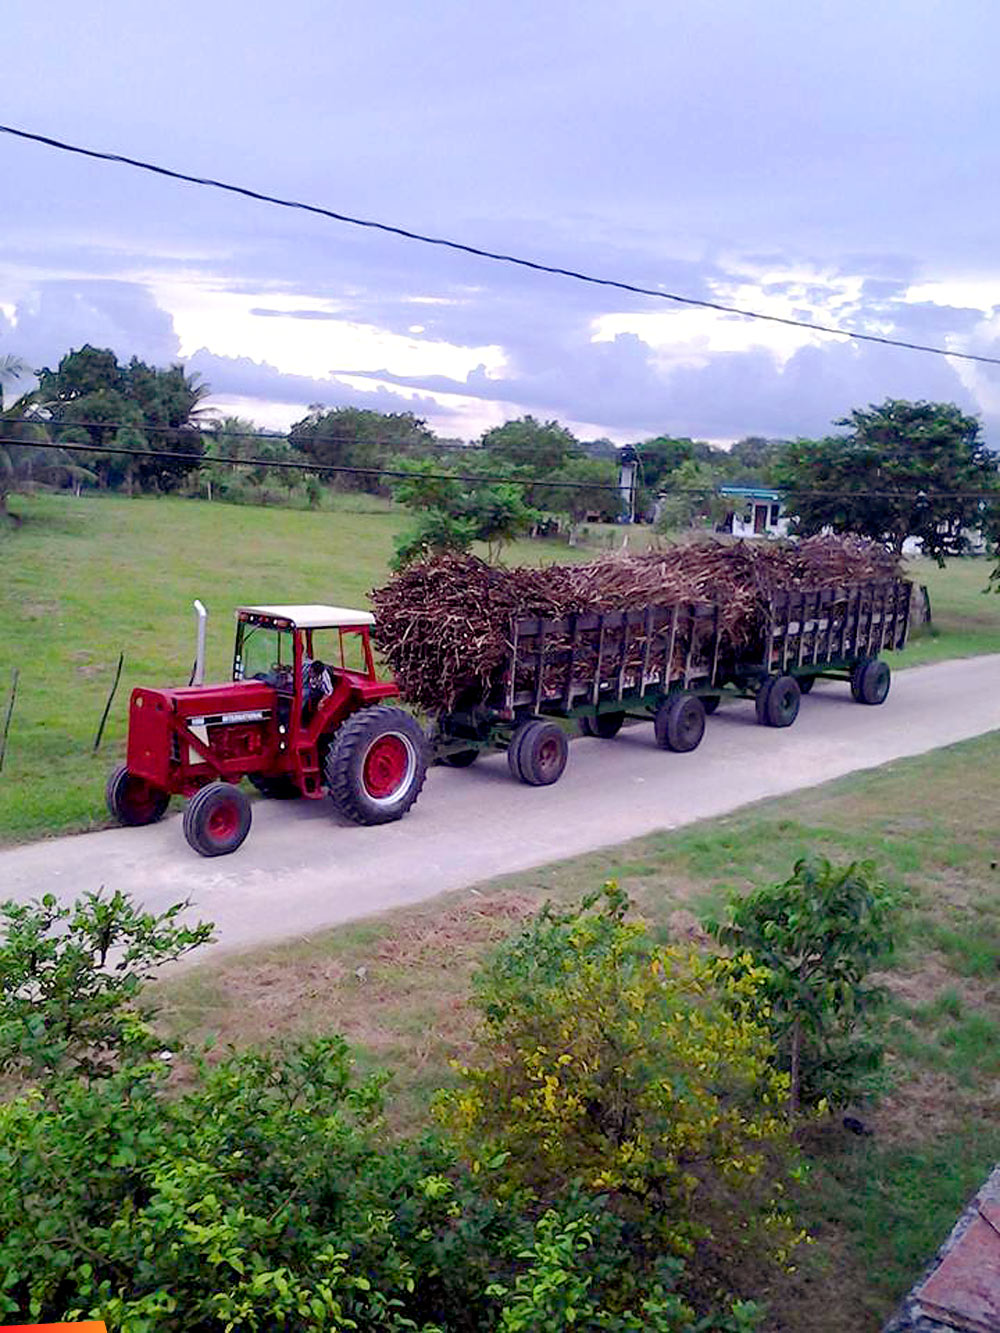 Sugar cane just harvested, pulled with tractor